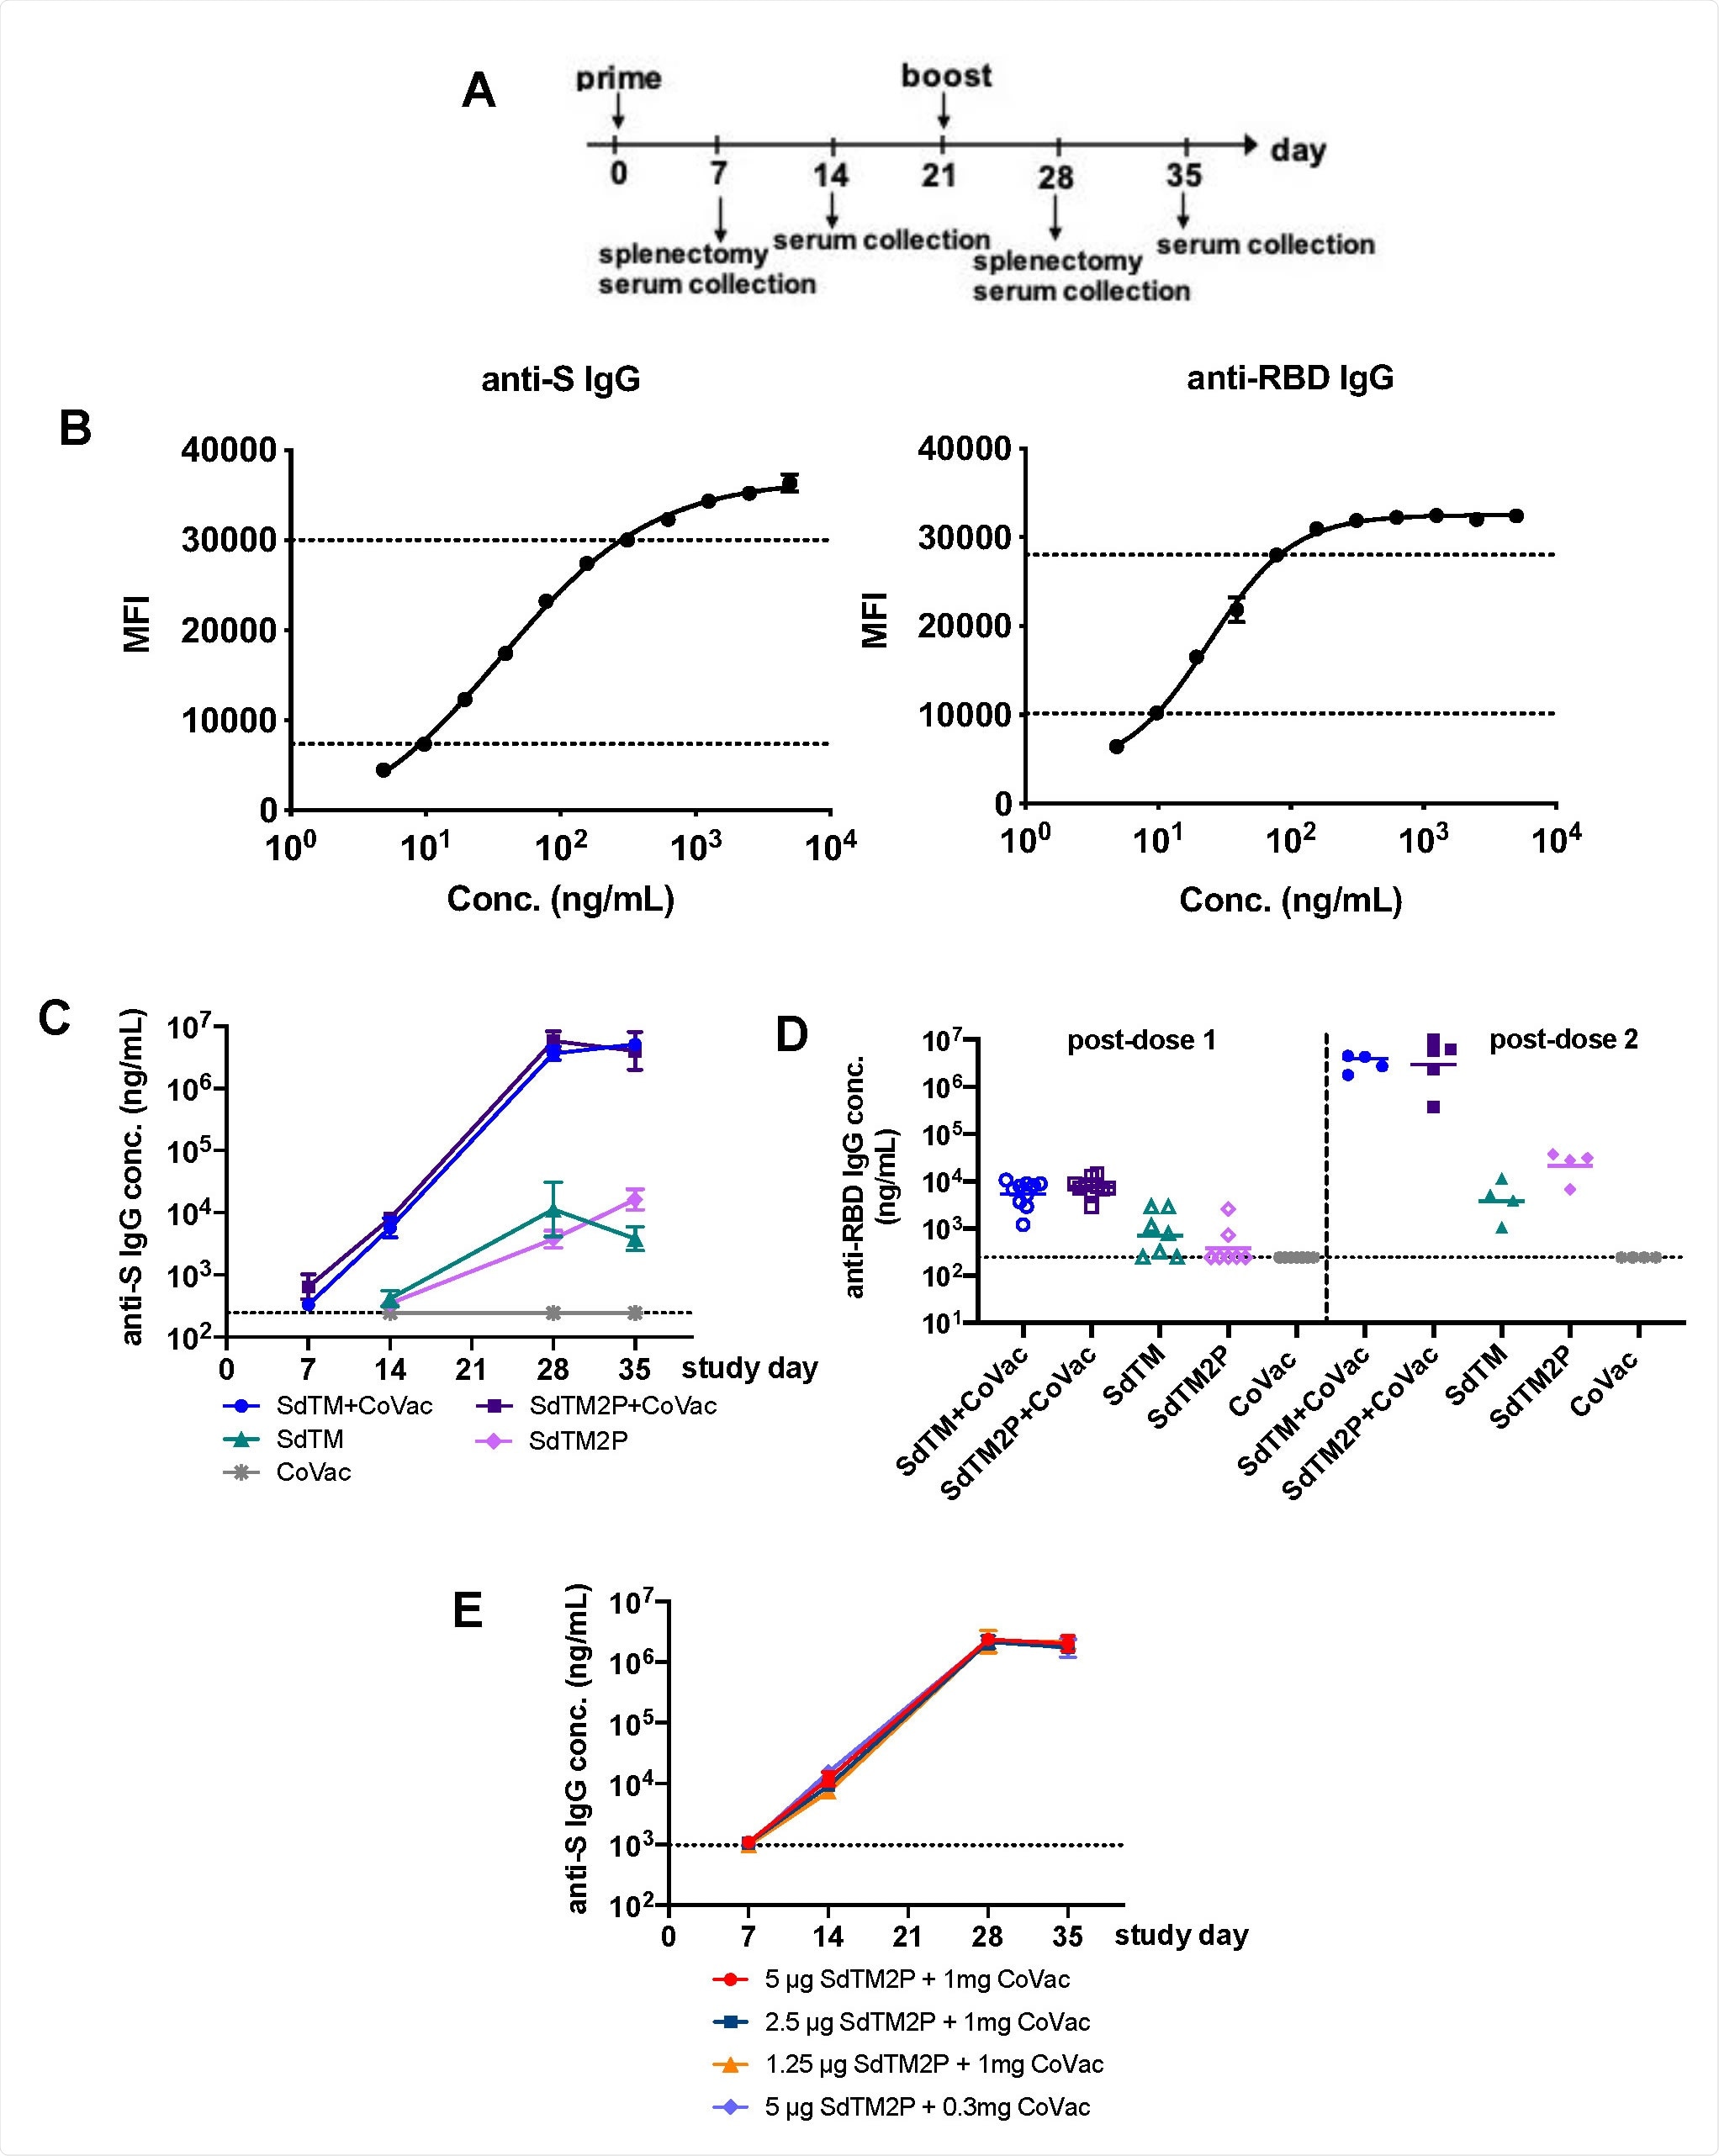 IgG antibody responses to recombinant SARS-CoV-2 S proteins. (A) Groups of Swiss Webster mice (n=7 or 15) were immunized with one or two doses of recombinant S proteins with or without CoVaccine HT™ (CoVac) adjuvant at a 3-week interval. Sera were collected 1 and 2 weeks after each immunization (days 7, 14, 28, and 35), and spleens were harvested 1 week (day 7 and 28) after each immunization. SARS-CoV-2 S-specific IgG titers were measured by a multiplex microsphere immunoassay (MIA) using SdTM2P and RBD-F coupled beads. (B) The purified anti-S antibody was diluted to concentrations in the range of 4.8 to 5000 ng/mL and analyzed by MIA as a standard (as described in the Materials and Methods). Mouse sera were assayed along with the antibody standard and the IgG concentrations was interpolated from the standard curves using a sigmoidal dose-response computer model (GraphPad Prism). The dotted lines denote the top and bottom of linear range that were used to interpolate antibody concentration (C) The anti-S and (D) anti-RBD antibody titers in sera from mice immunized with SdTM or SdTM2P (purified by hACE2 AC) with or without adjuvants or (E) anti-S antibody in sera of mice administered different dosages (5, 2.5, or 1.25 μg) of SdTM2P (purified by mAb IAC) with adjuvant (1 or 0.3 mg) are expressed as IgG concentrations (ng/mL). The dotted lines in panels C to E indicate the bottom of linear range of the standard curve.